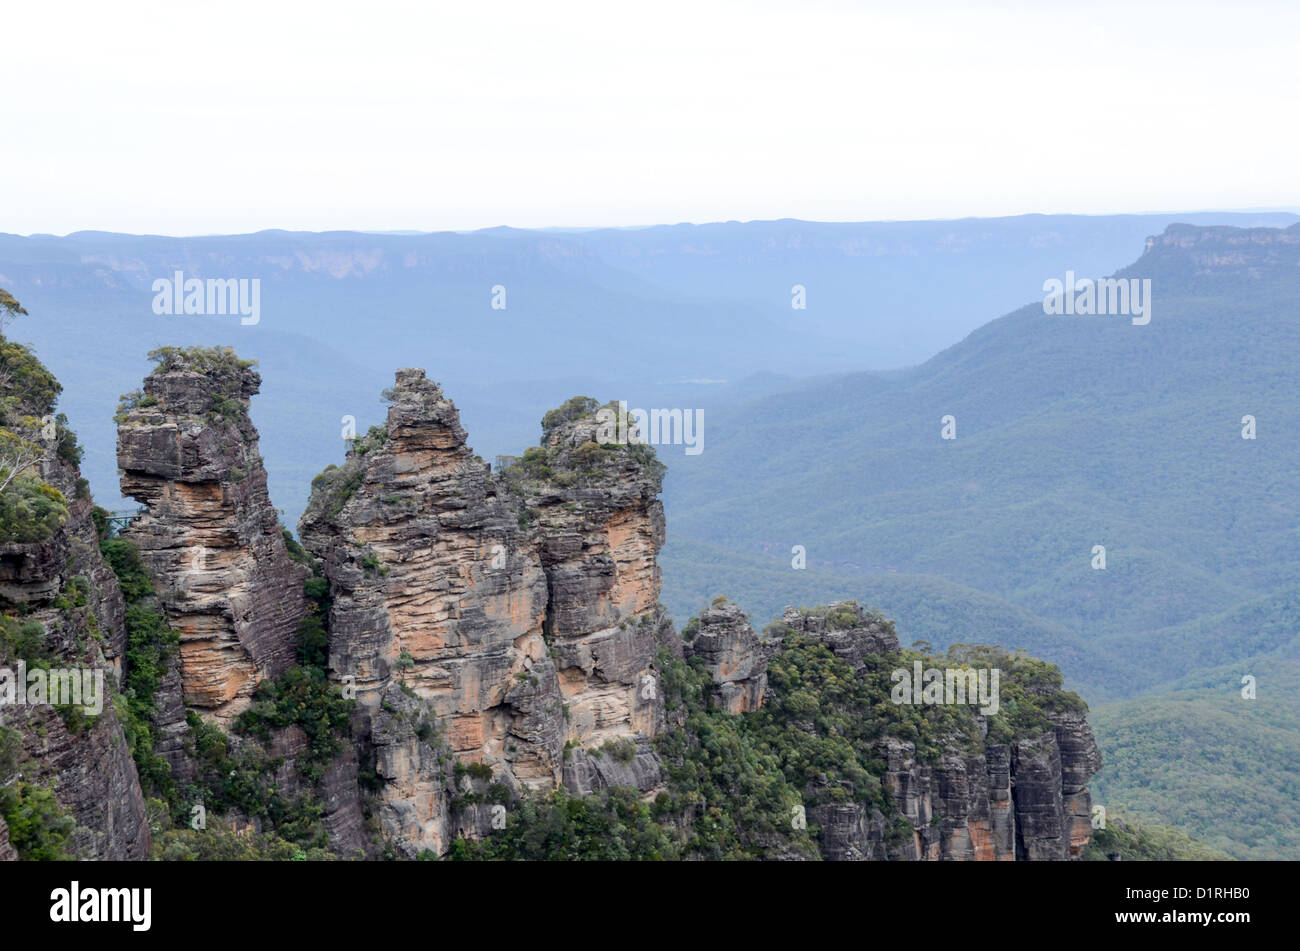 KATOOMBA, Australia - The natural rock formation known as the Three Sisters in the Blue Mountains as seen from Echo Point in Katoomba, New South Wales, Australia. Stock Photo